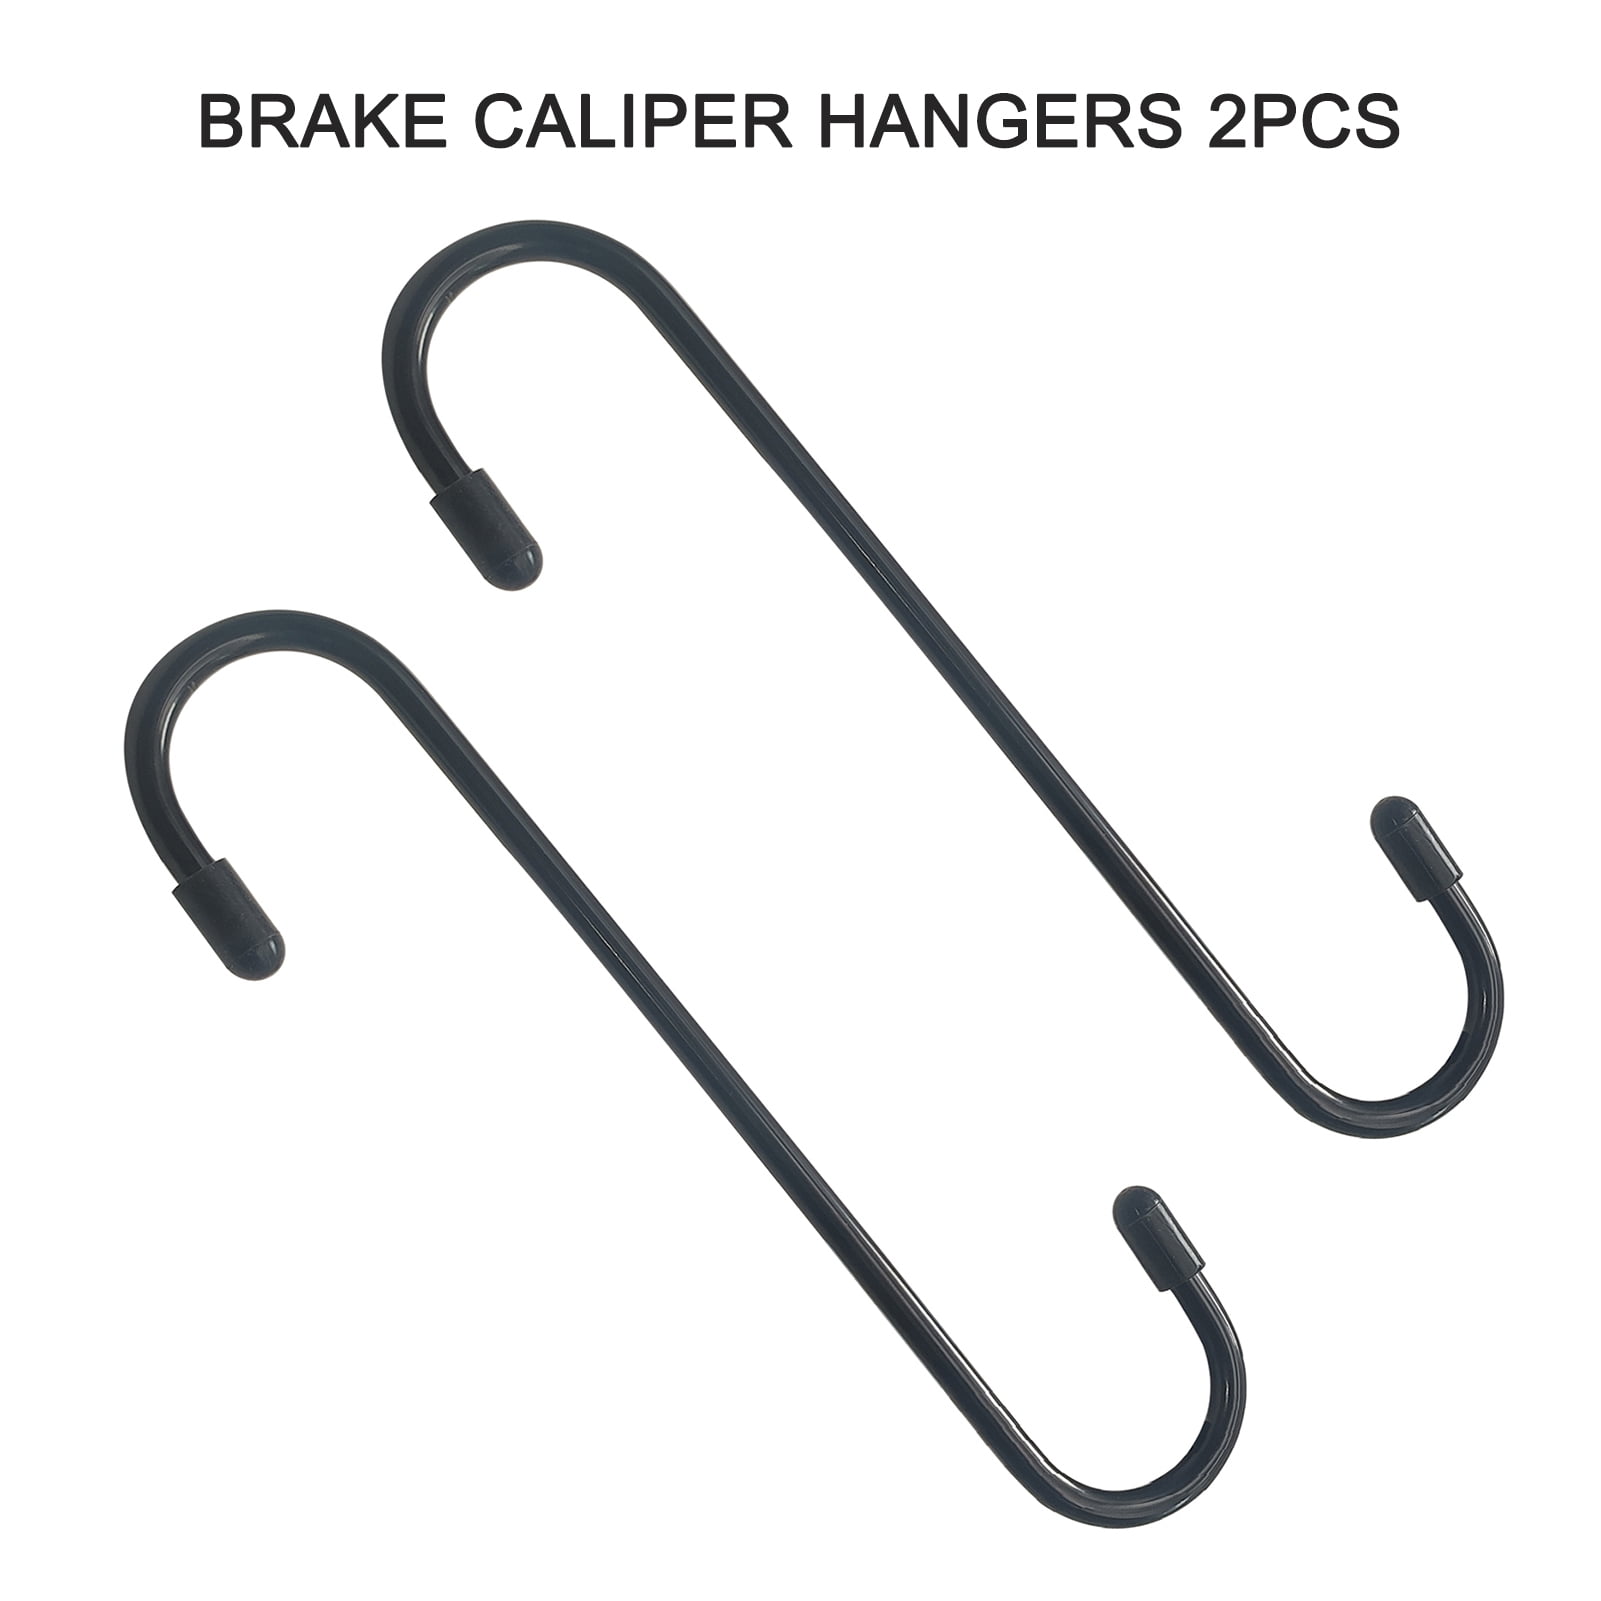 5 Colors 5 Pieces Brake Caliper Hangers Hook for Automotive Tool Use in Brake Bearing Axle Suspension S Shape 